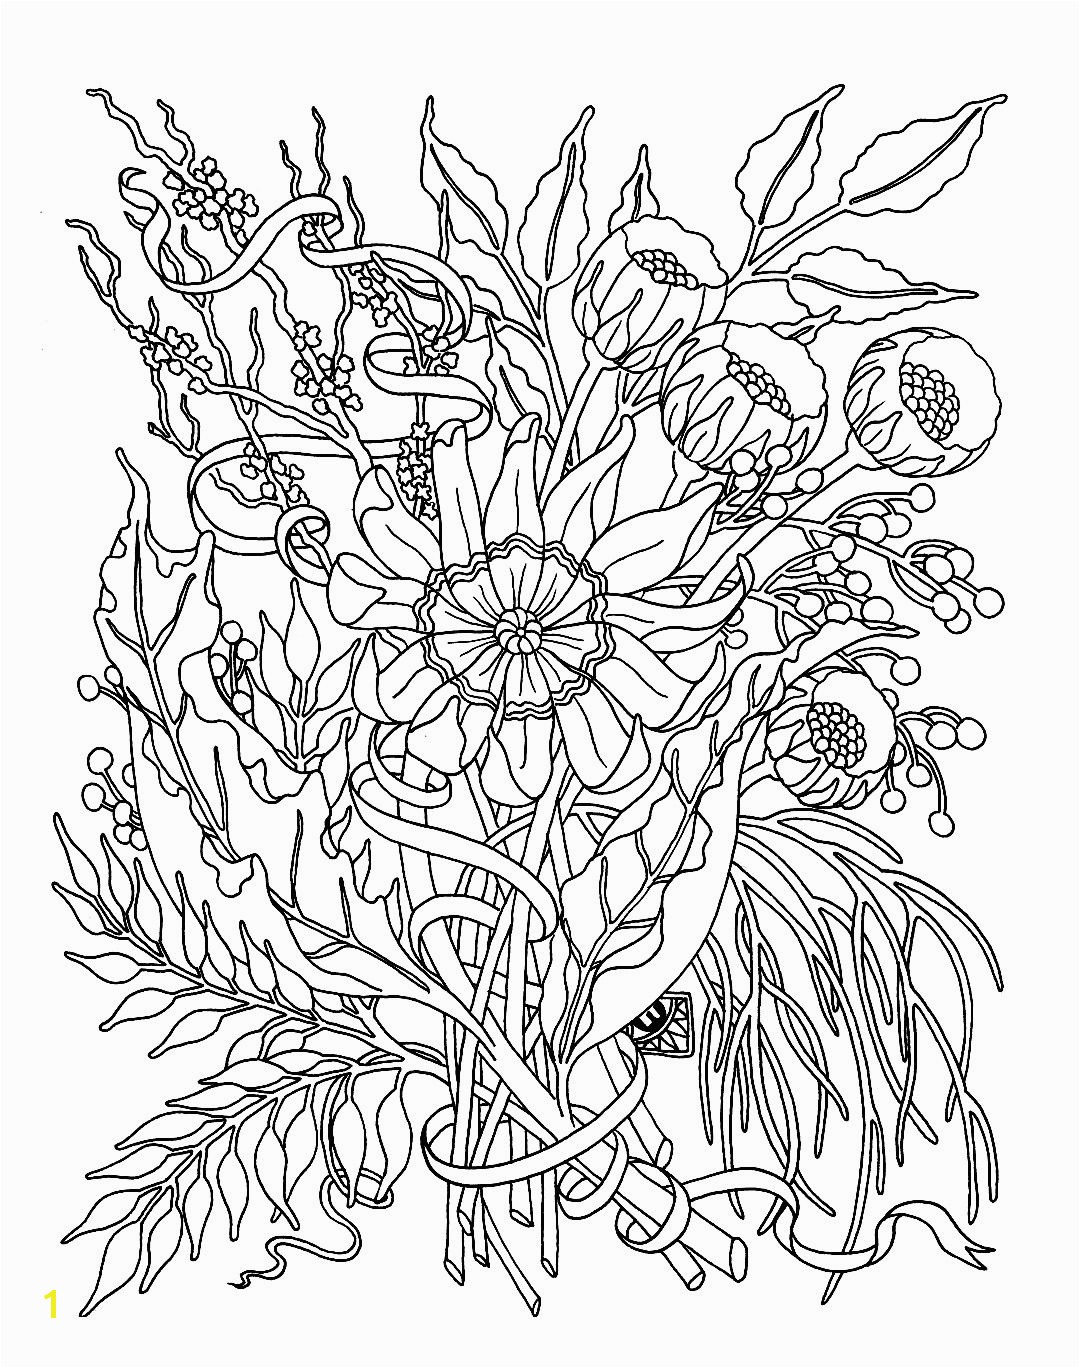 Free coloring page coloring for adult flowers garden Still some beautiful flowers of the garden to color but do not be fooled by their beauty